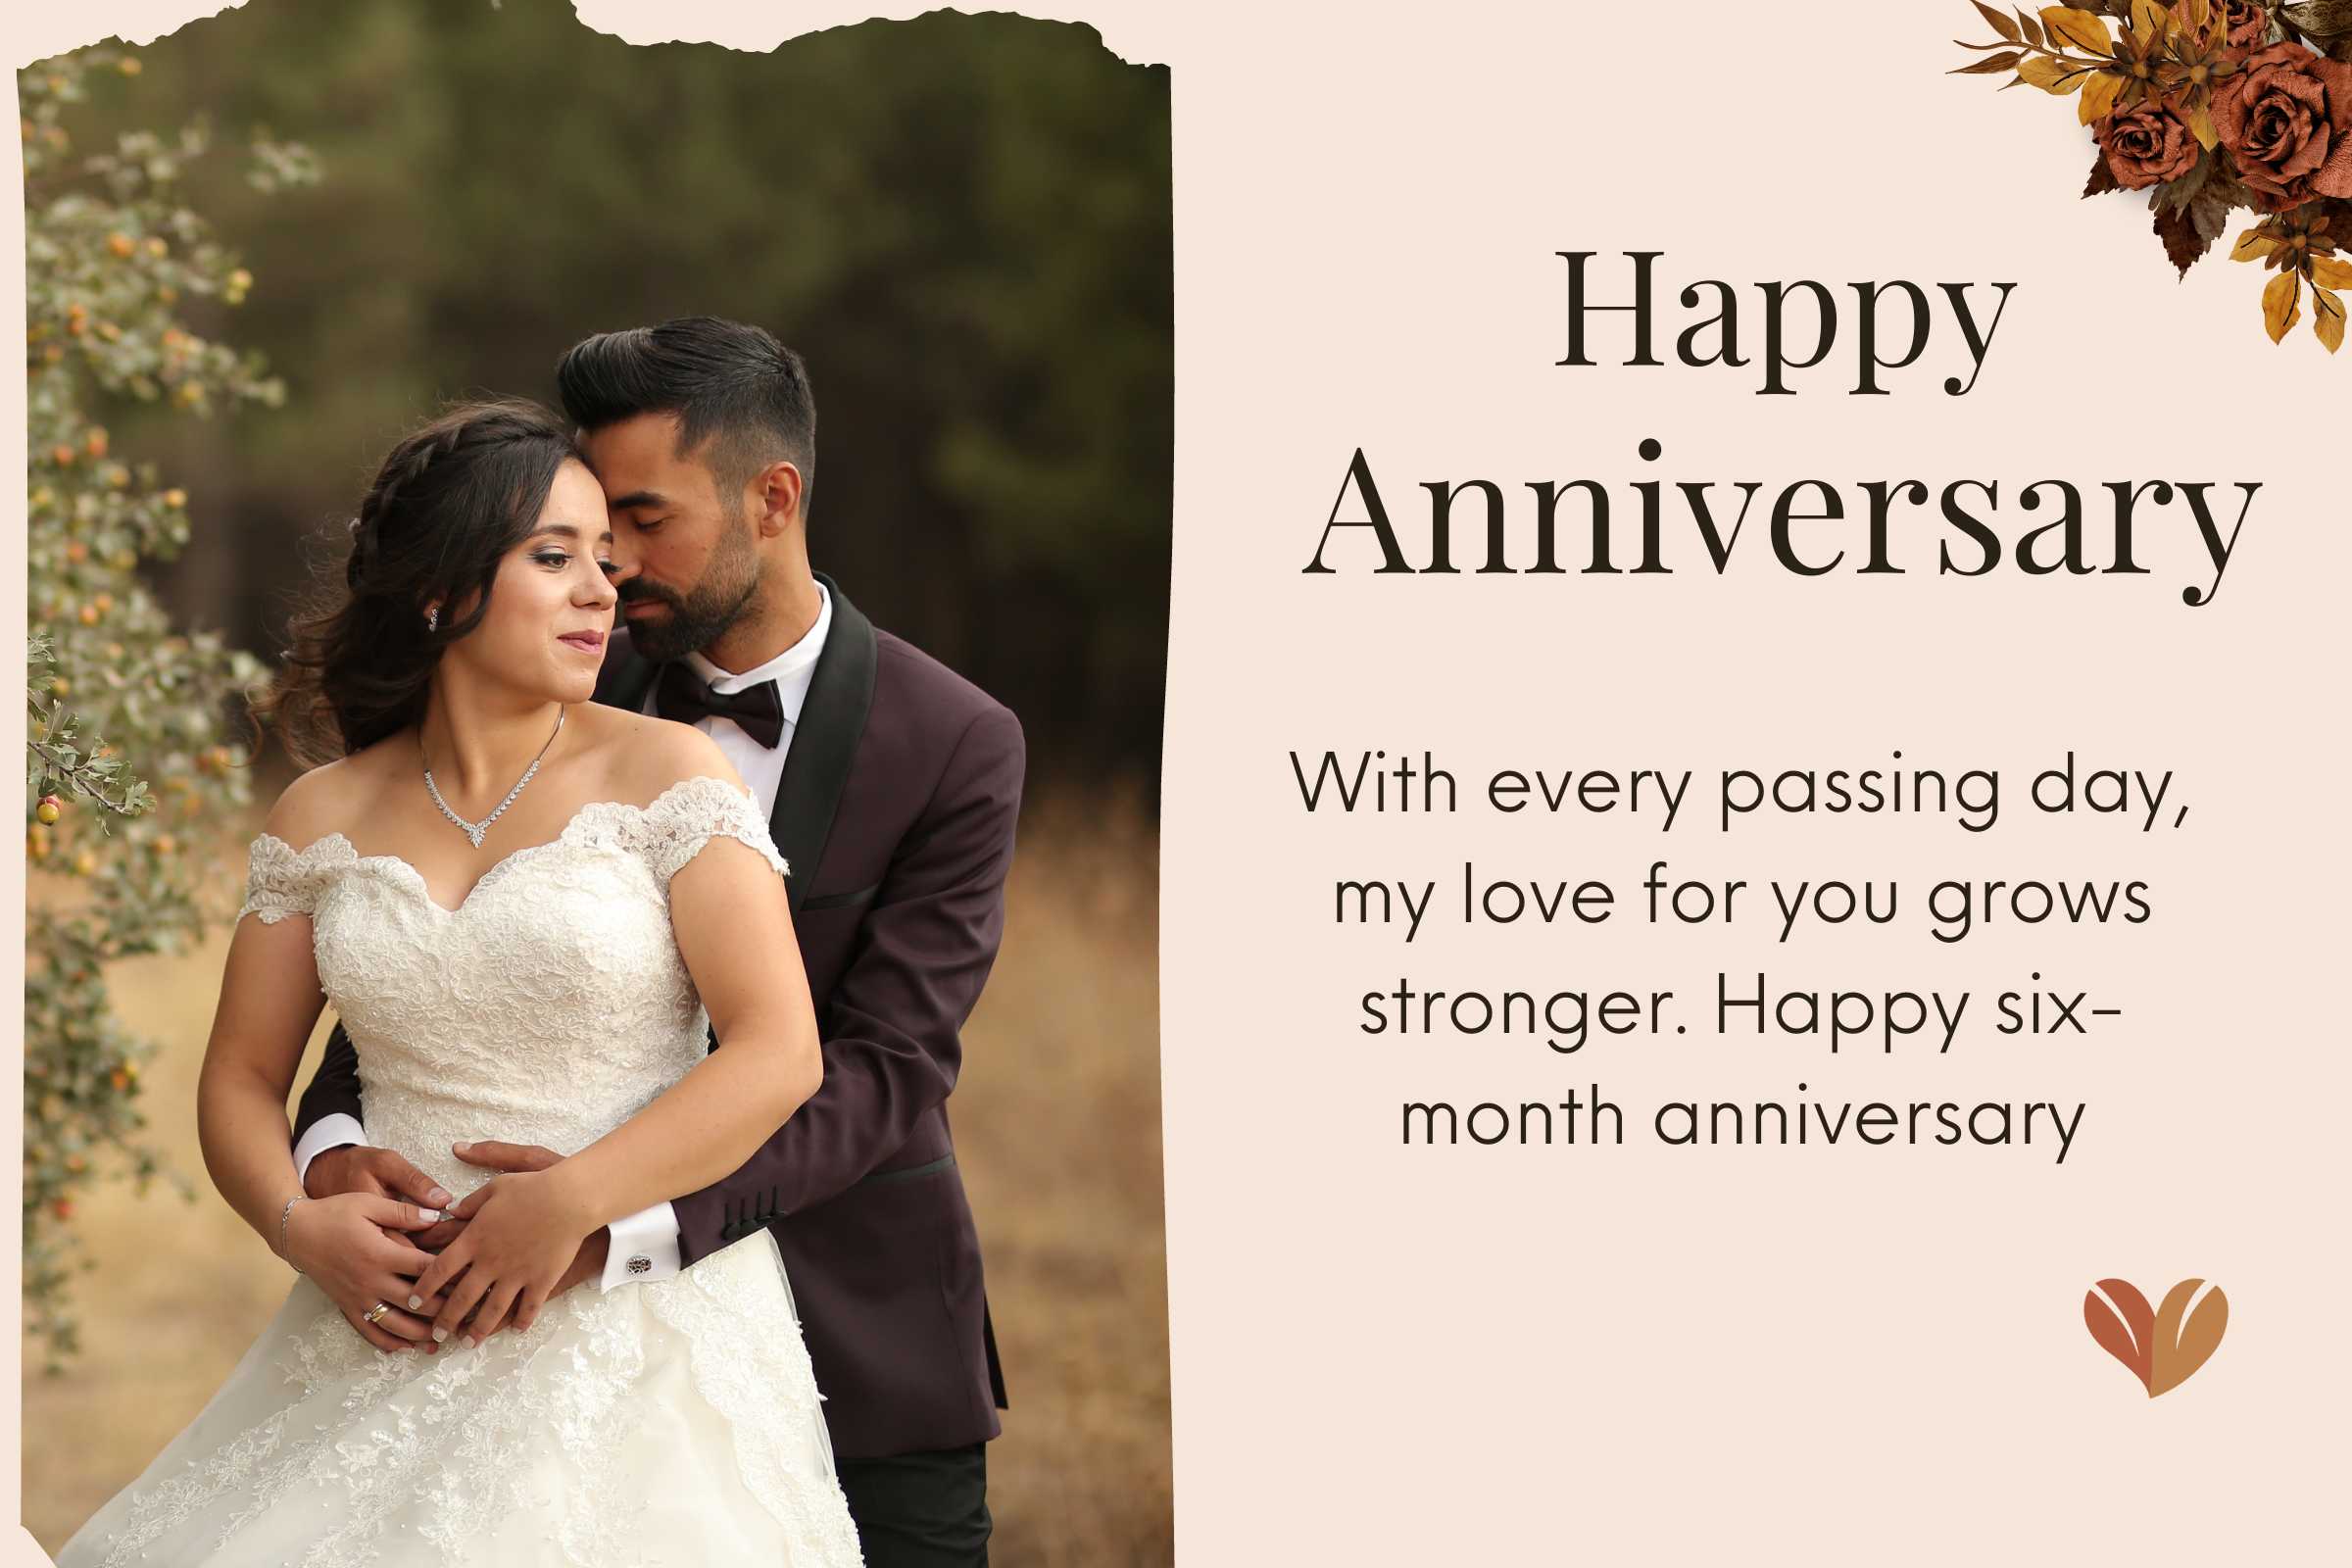 100 Happy 6 month Anniversary Quotes, Messages, Captions